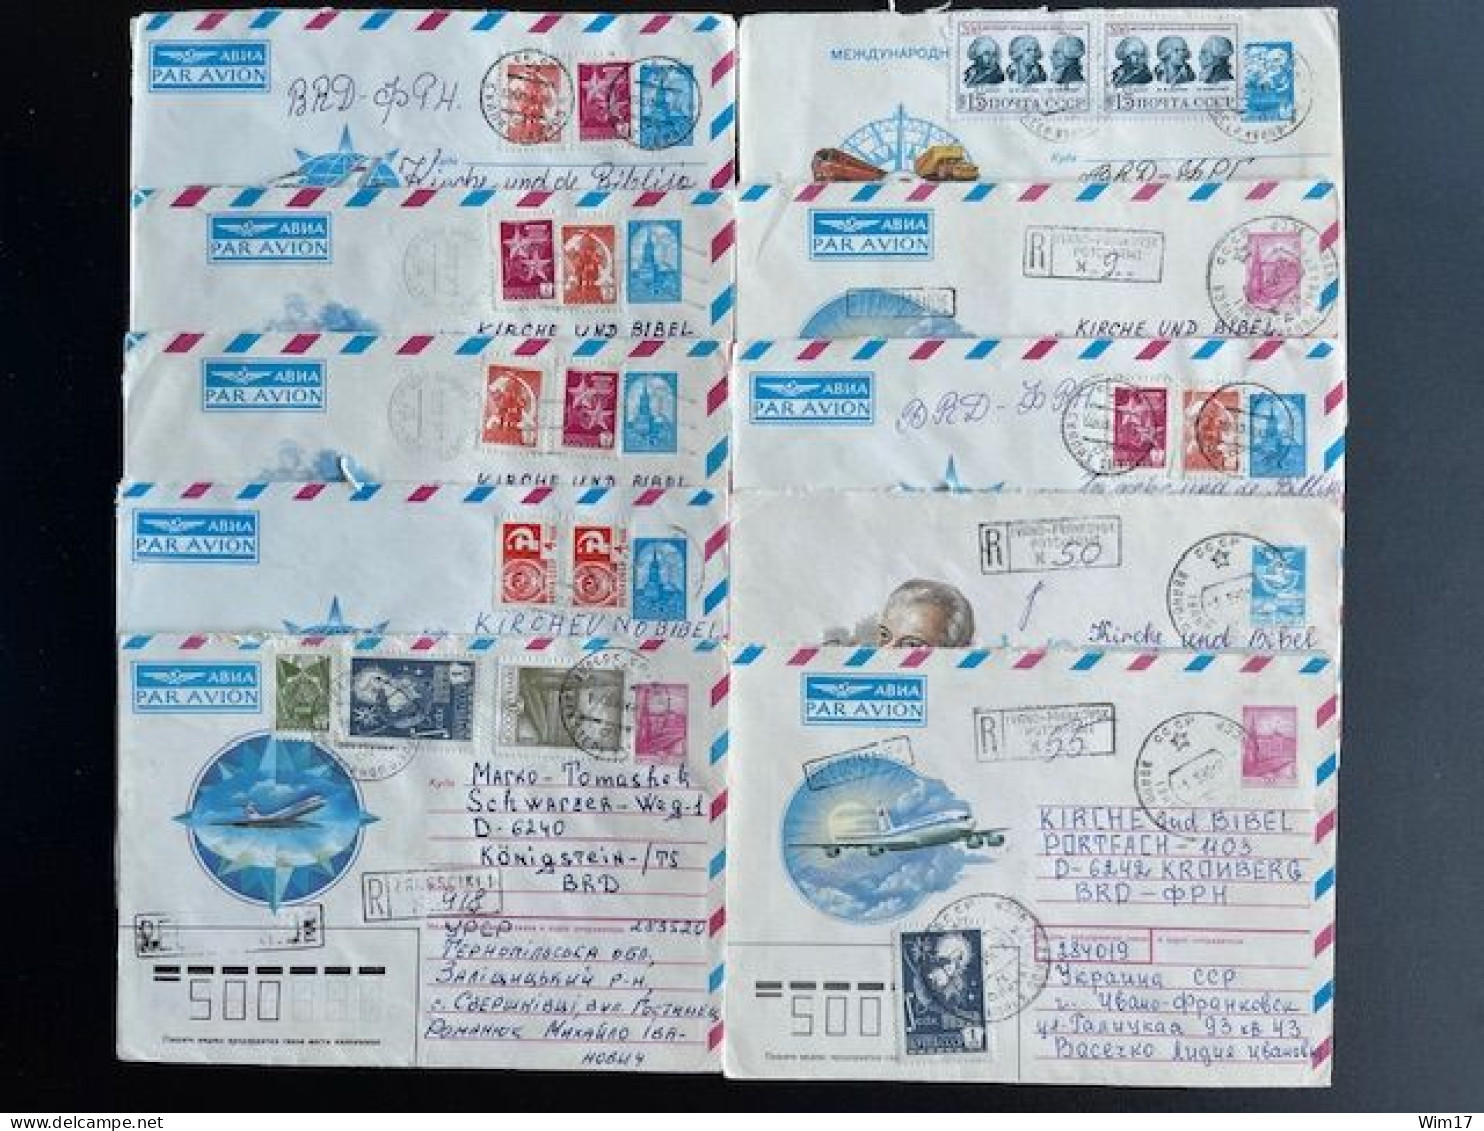 RUSSIA USSR 1990/1991 LOT OF 100 REGISTERED & STANDARD MAIL LETTERS CCCP SOVIET UNION SOVJET UNIE